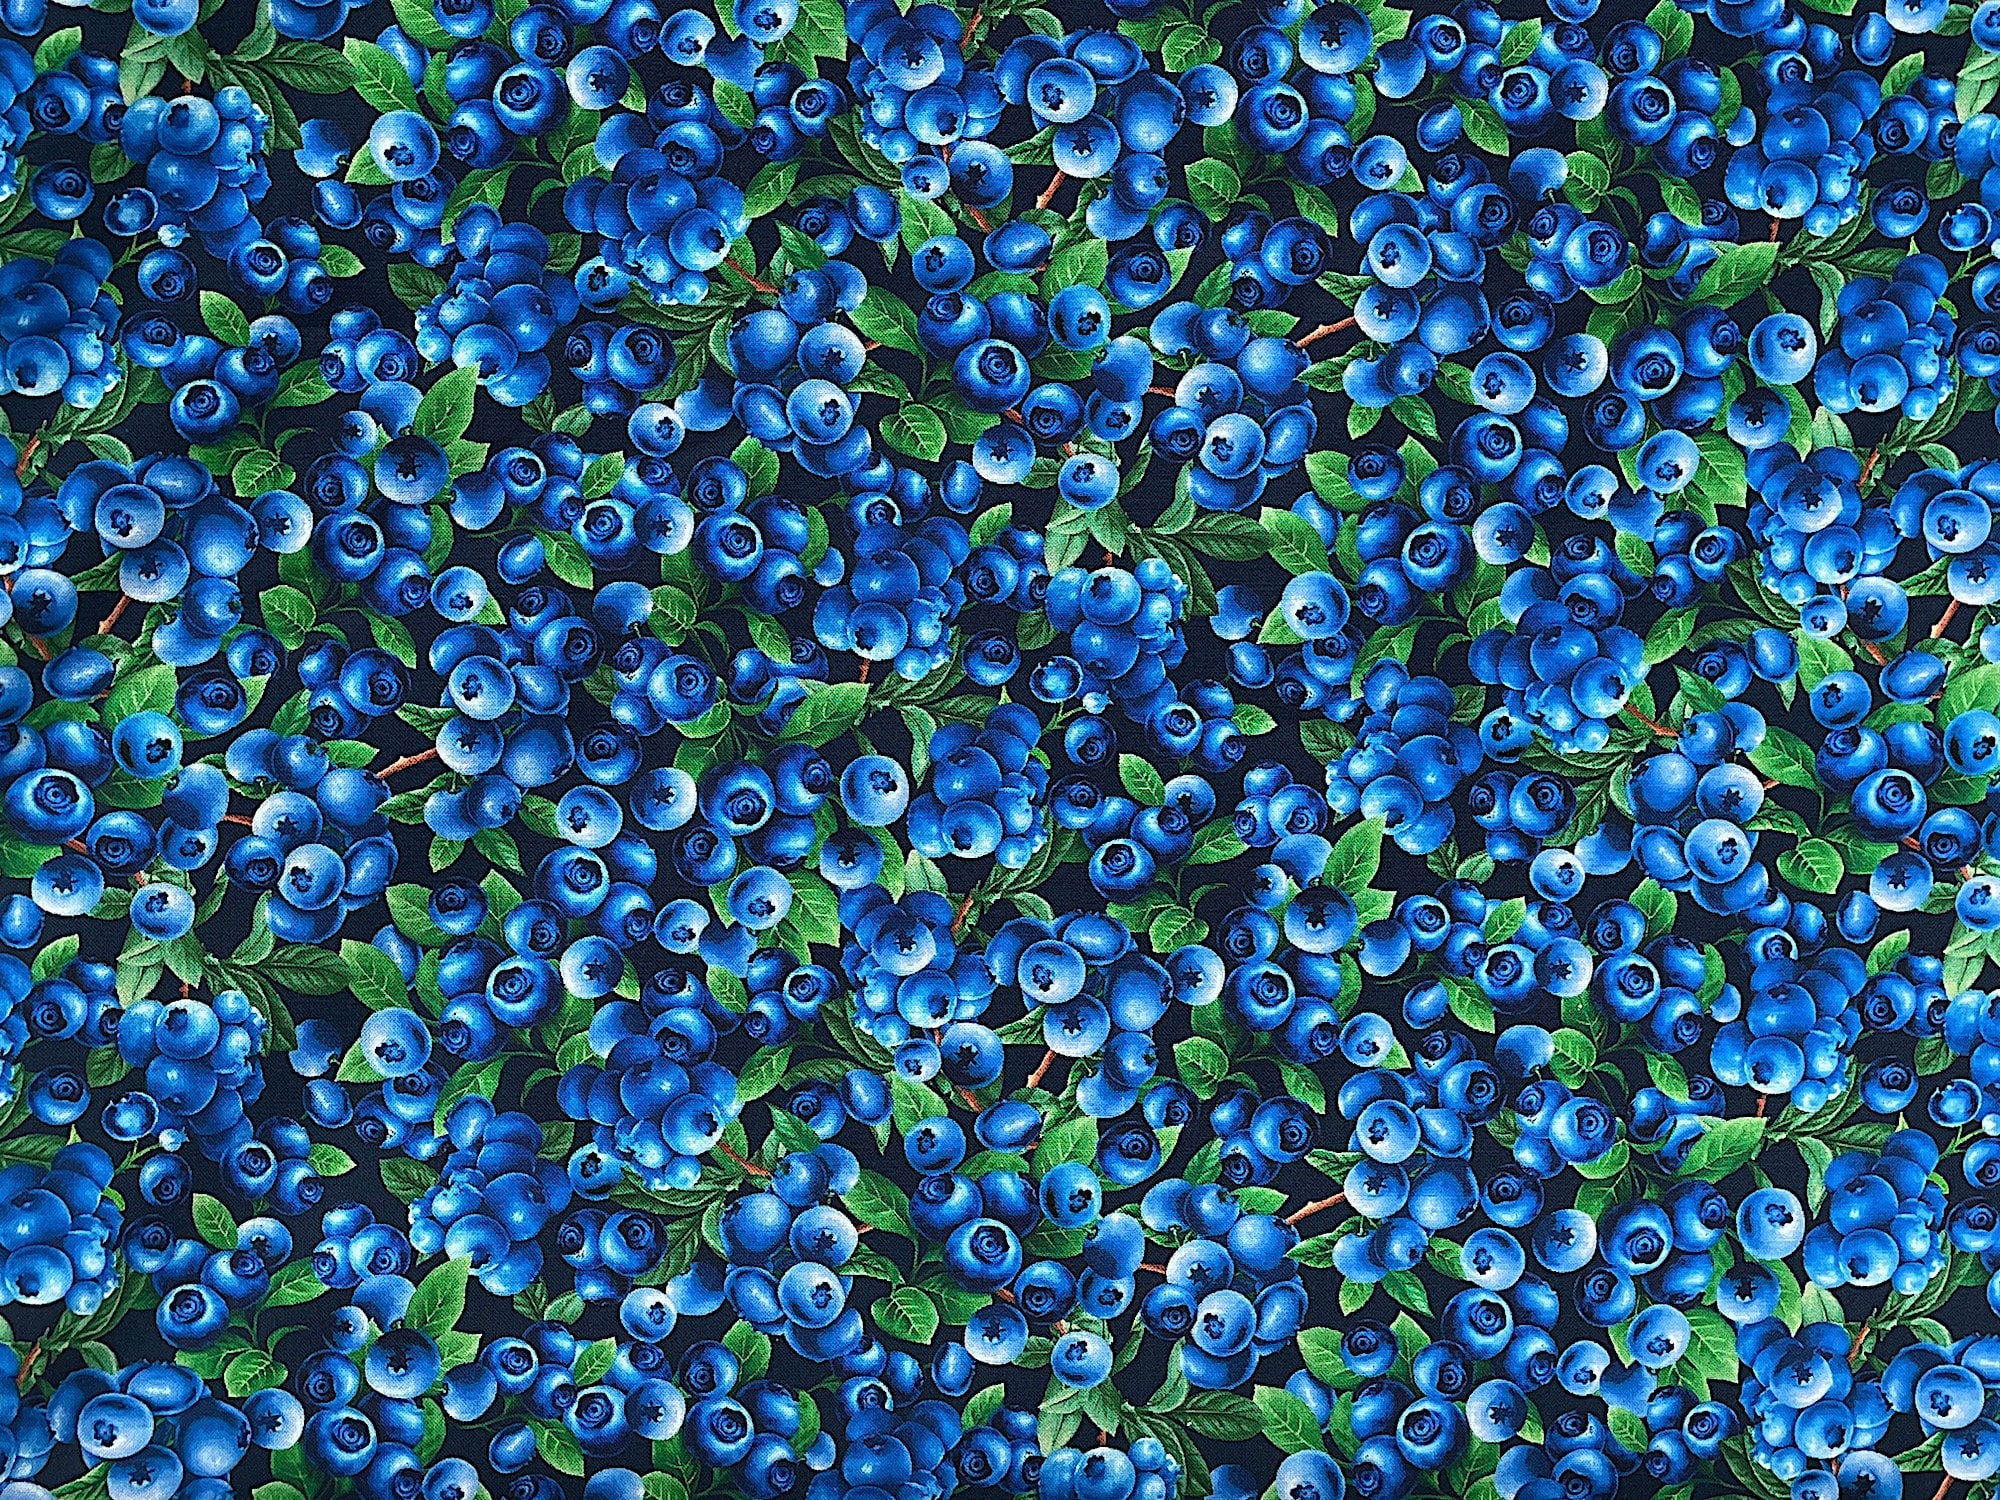 Cotton Fabric covered with blueberries and green leaves.